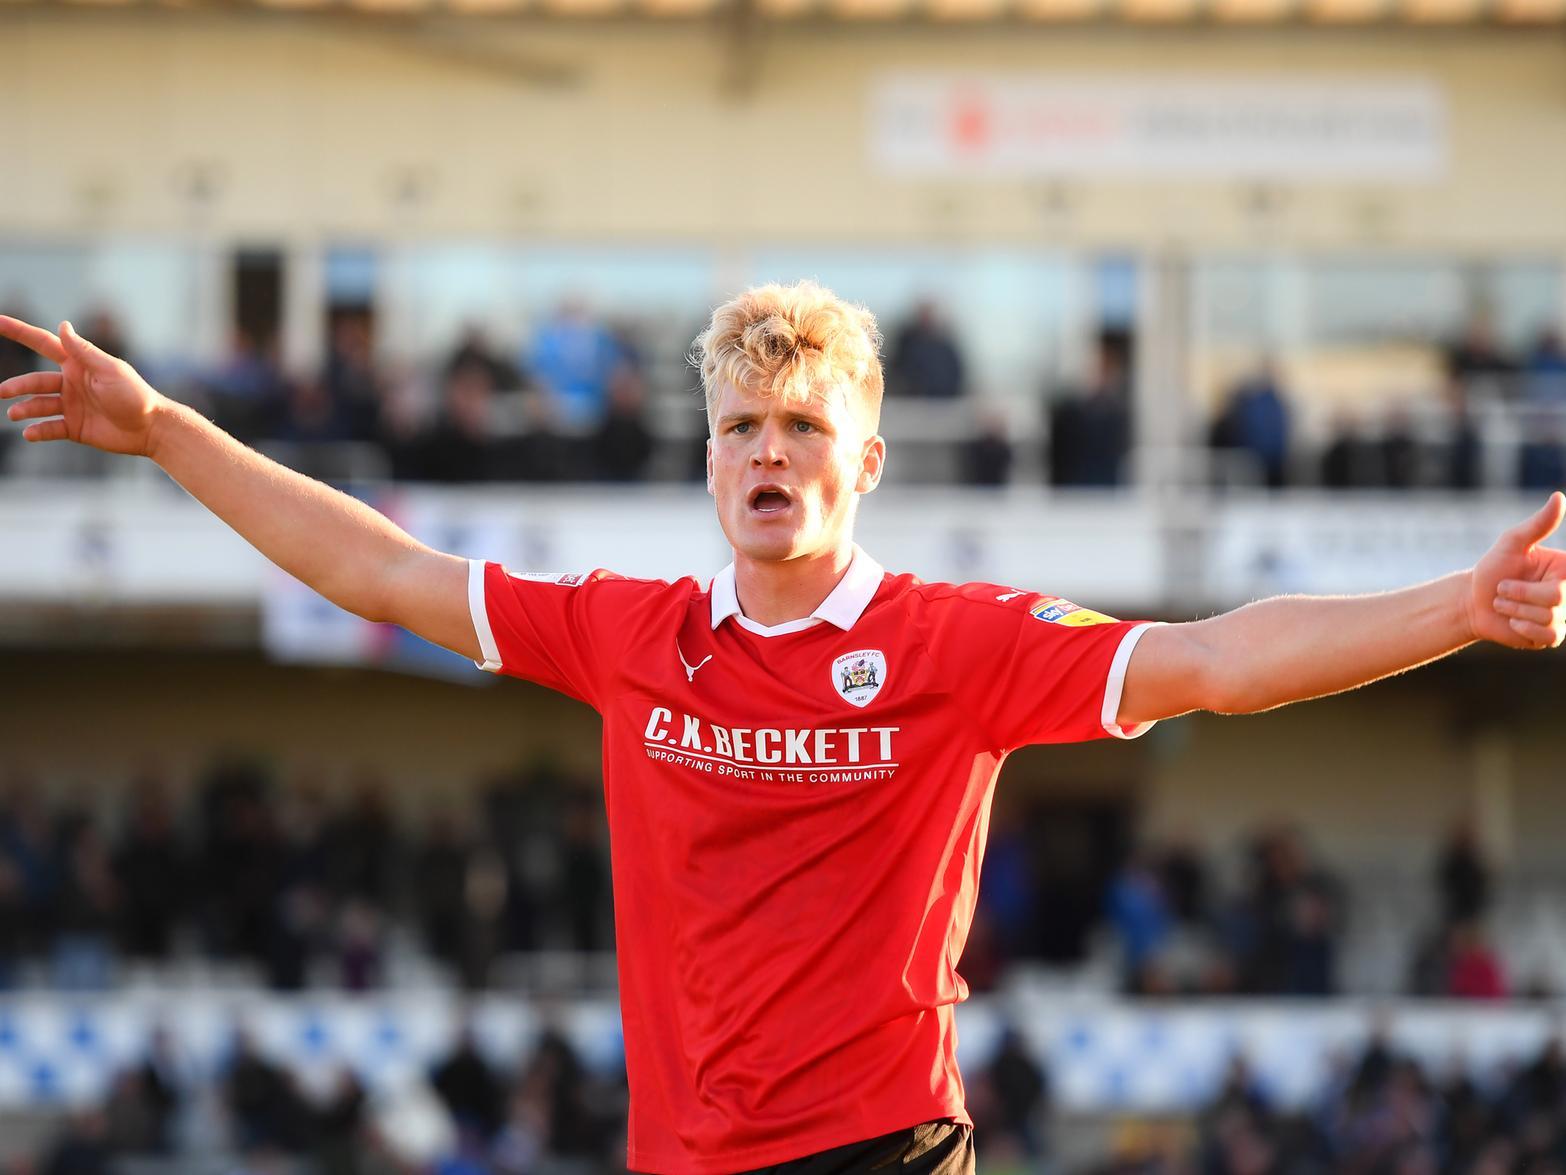 Portsmouth have announced the signing of Barnsley midfielder Cameron McGeehan until the end of the 2019/20 season. (Portsmouth News)